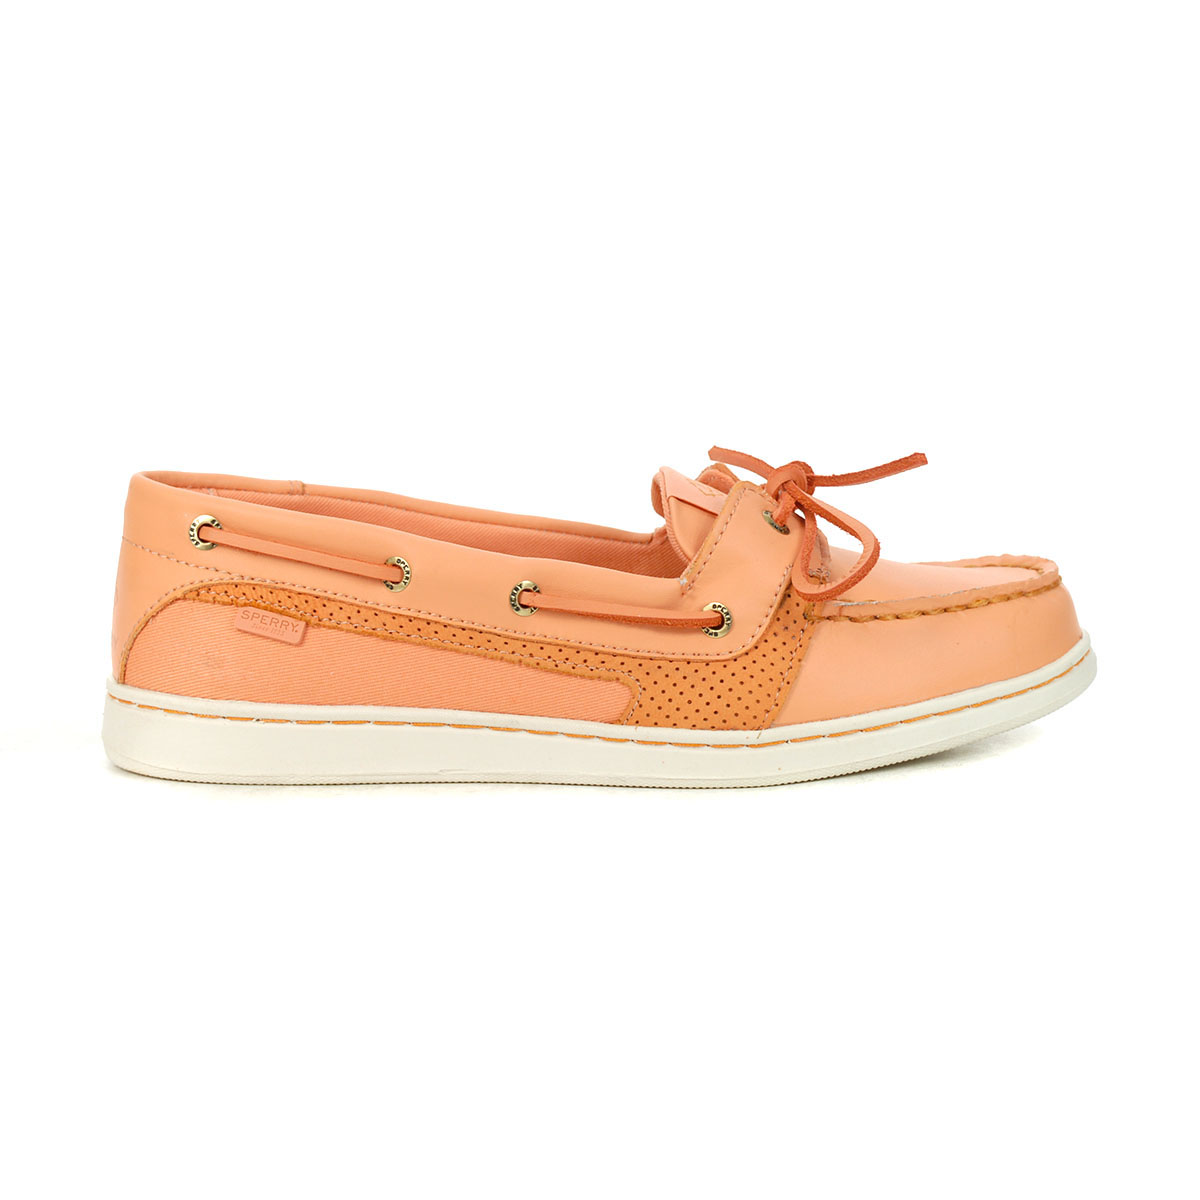 Sperry Women's Starfish Coral Leather Boat Shoes STS88008 - WOOKI.COM